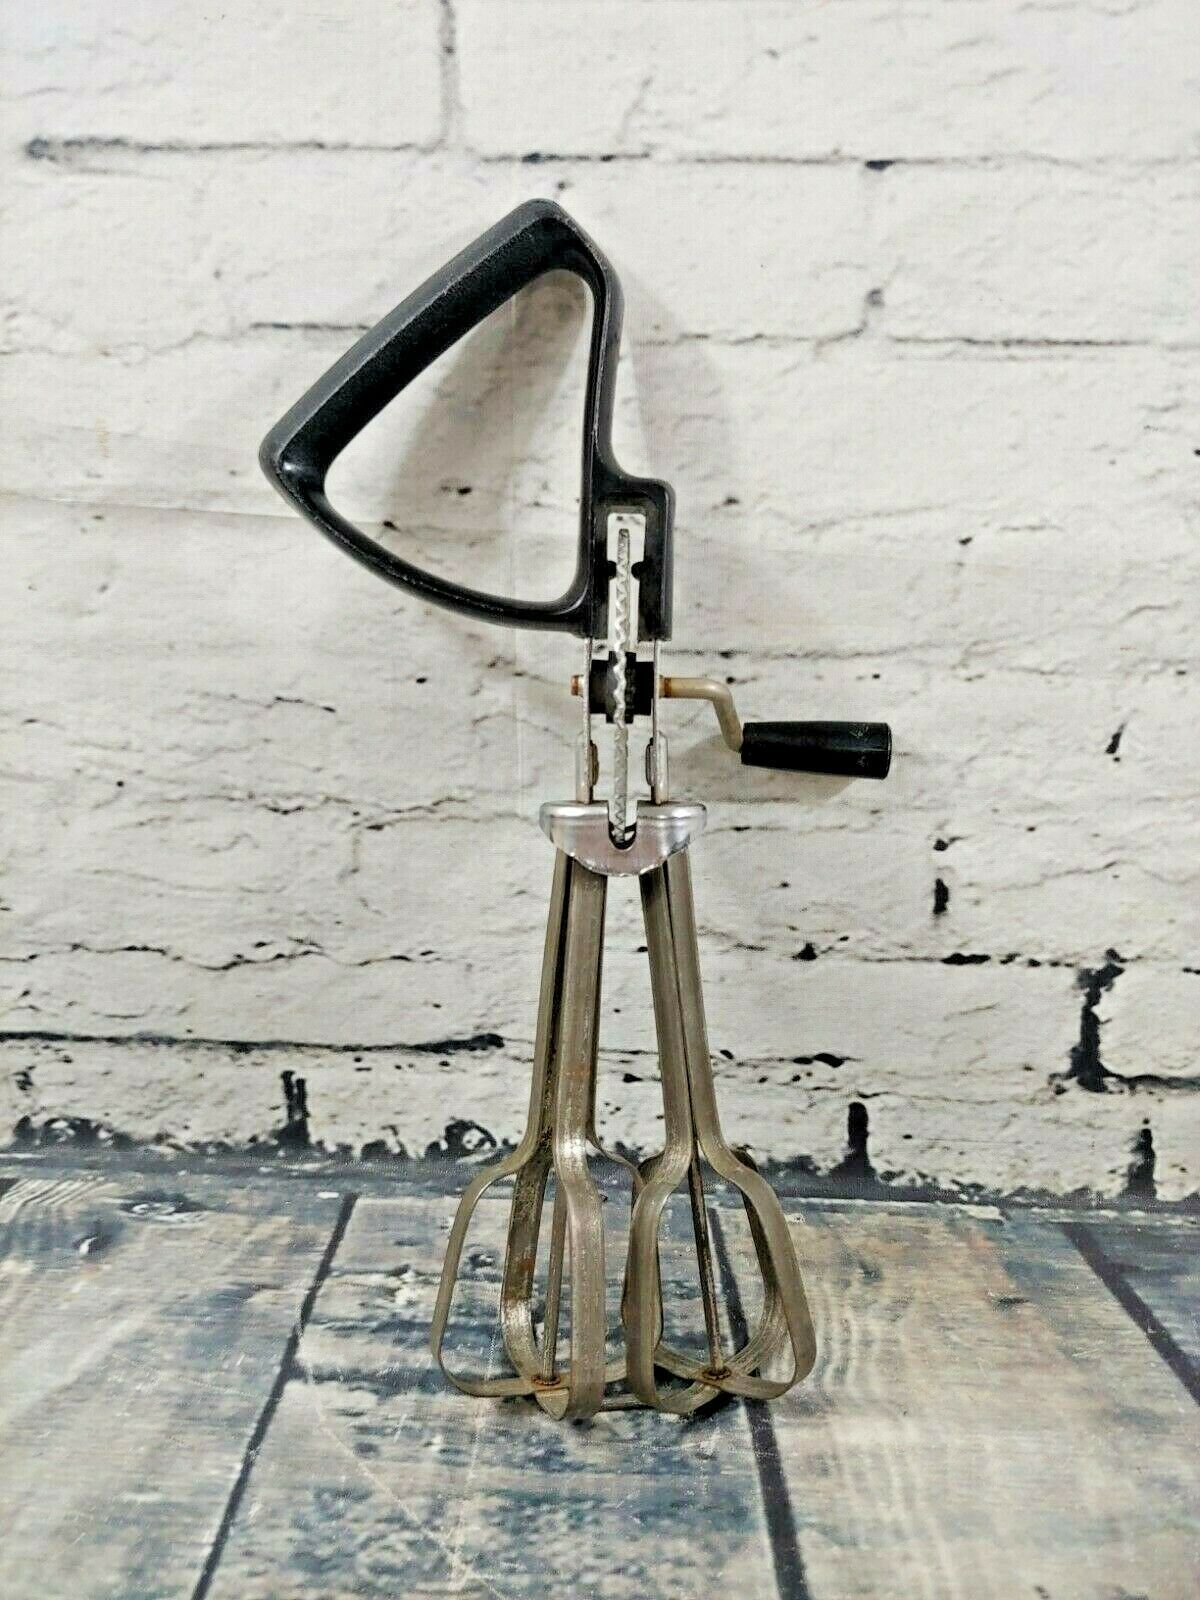 Ecko Best - Vintage Stainless Steel Manual Hand Mixer - Egg Beater